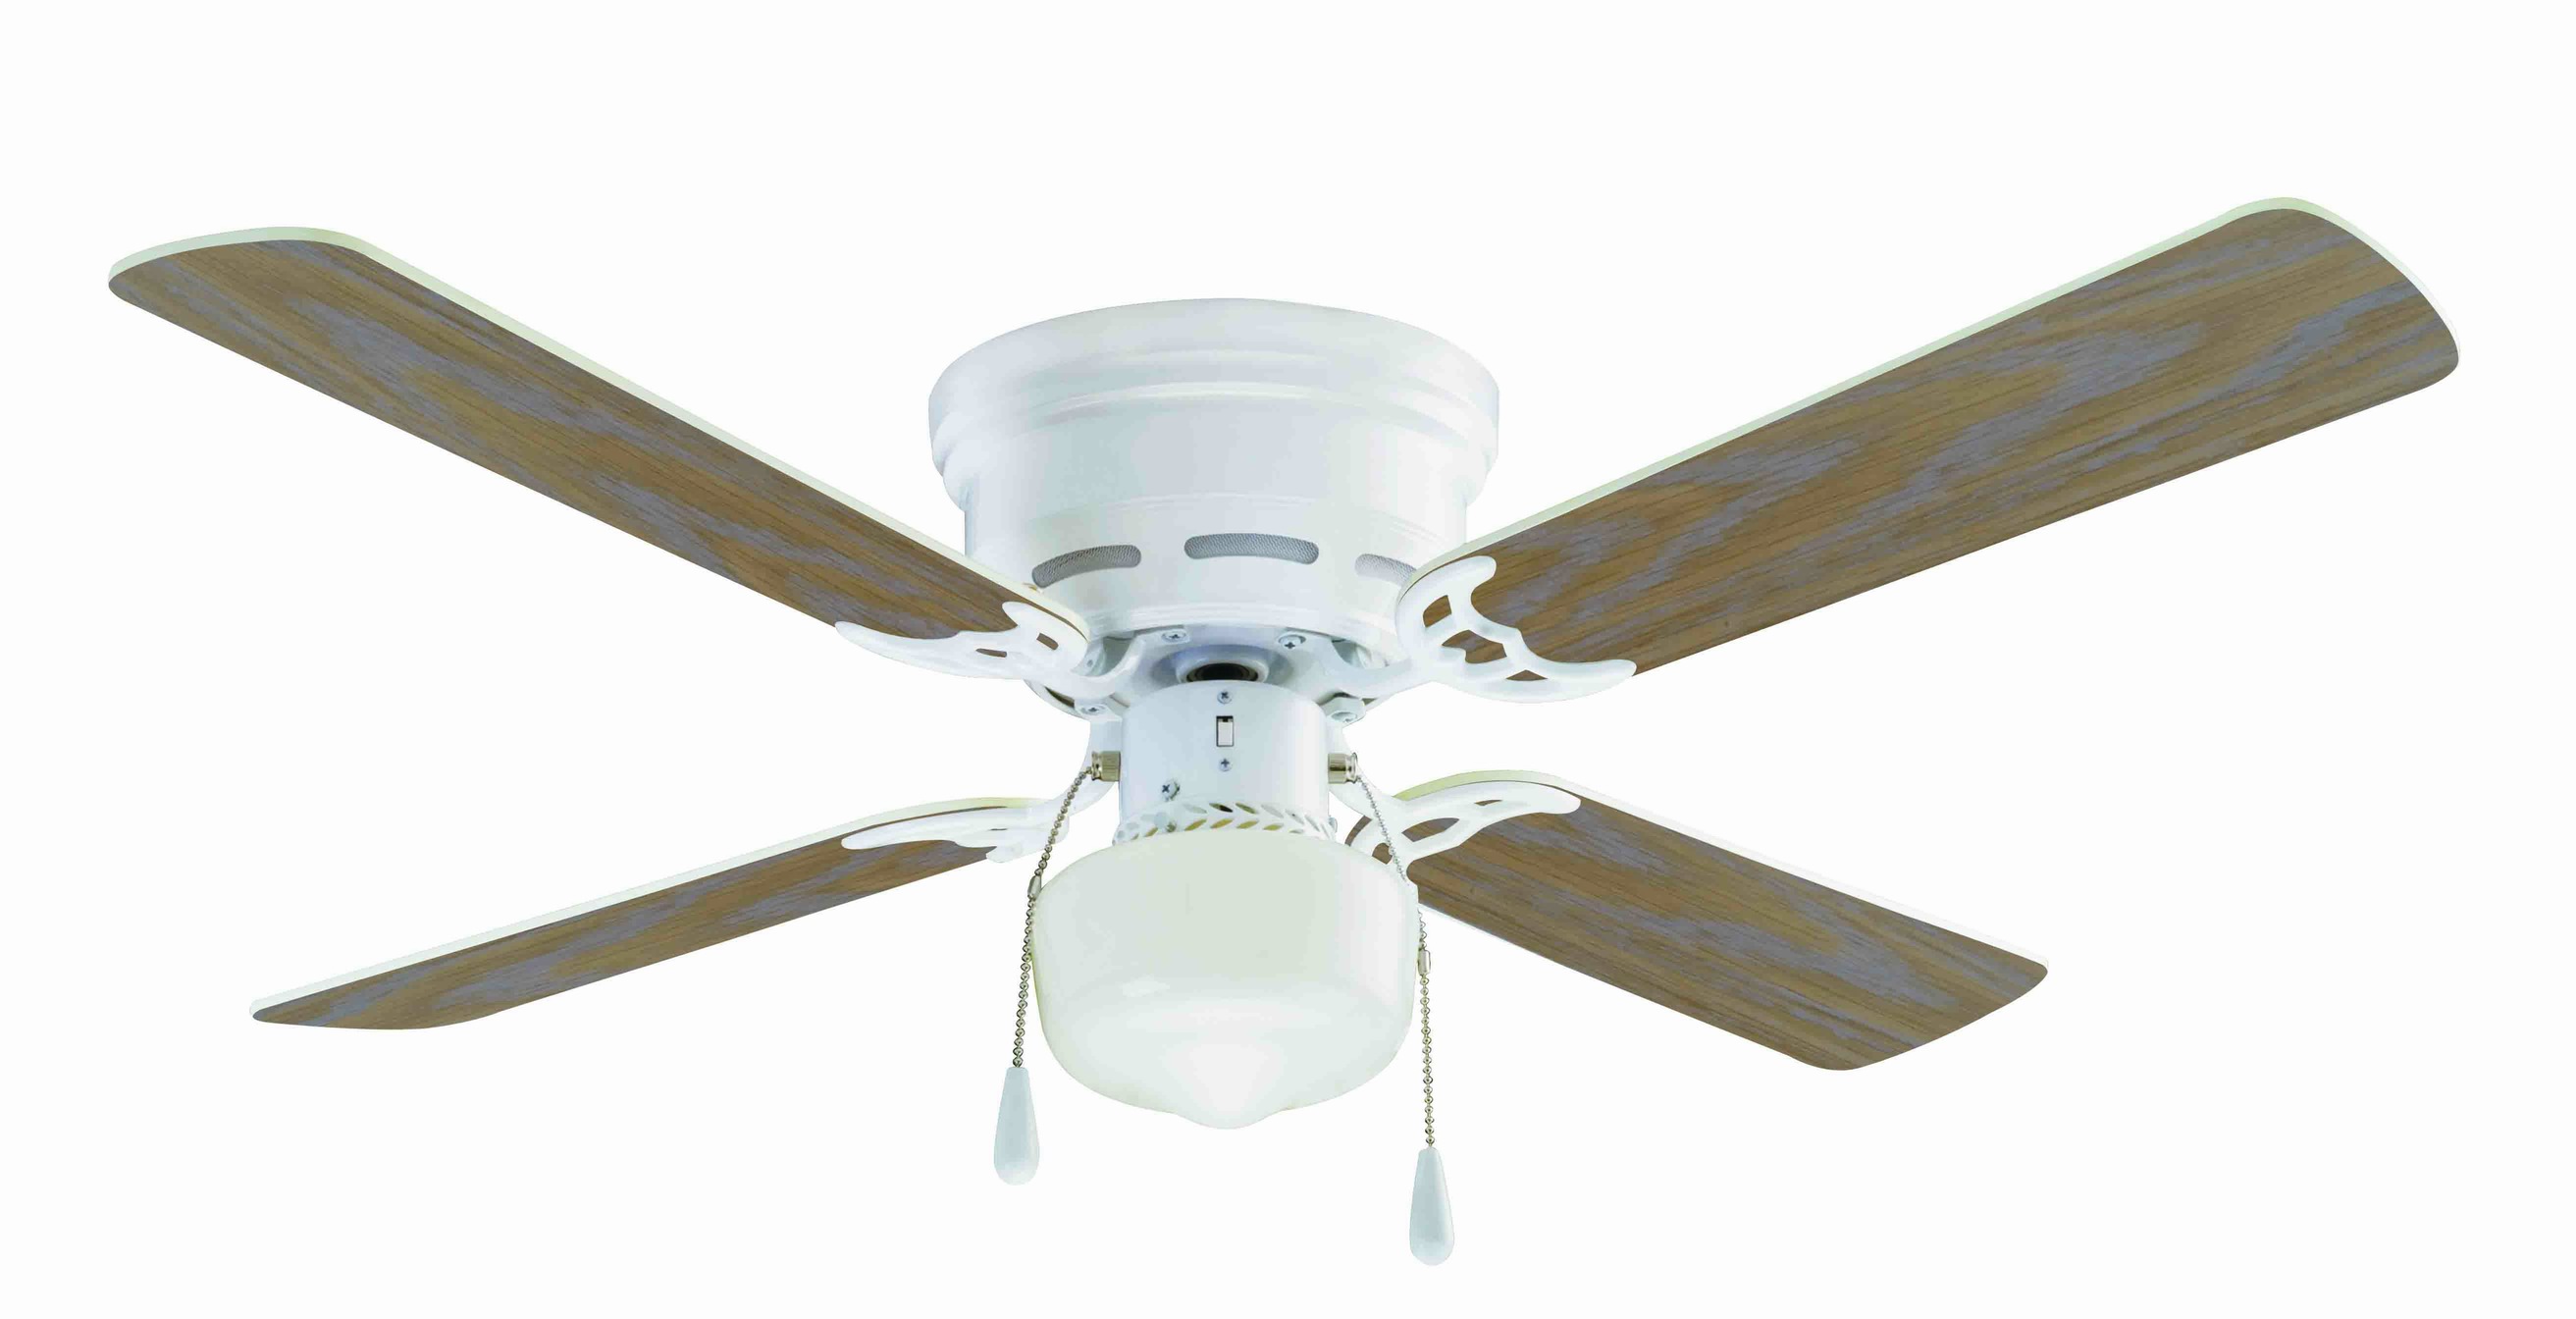 42" Mainstays Hugger Indoor Ceiling Fan with Light, White - image 2 of 2